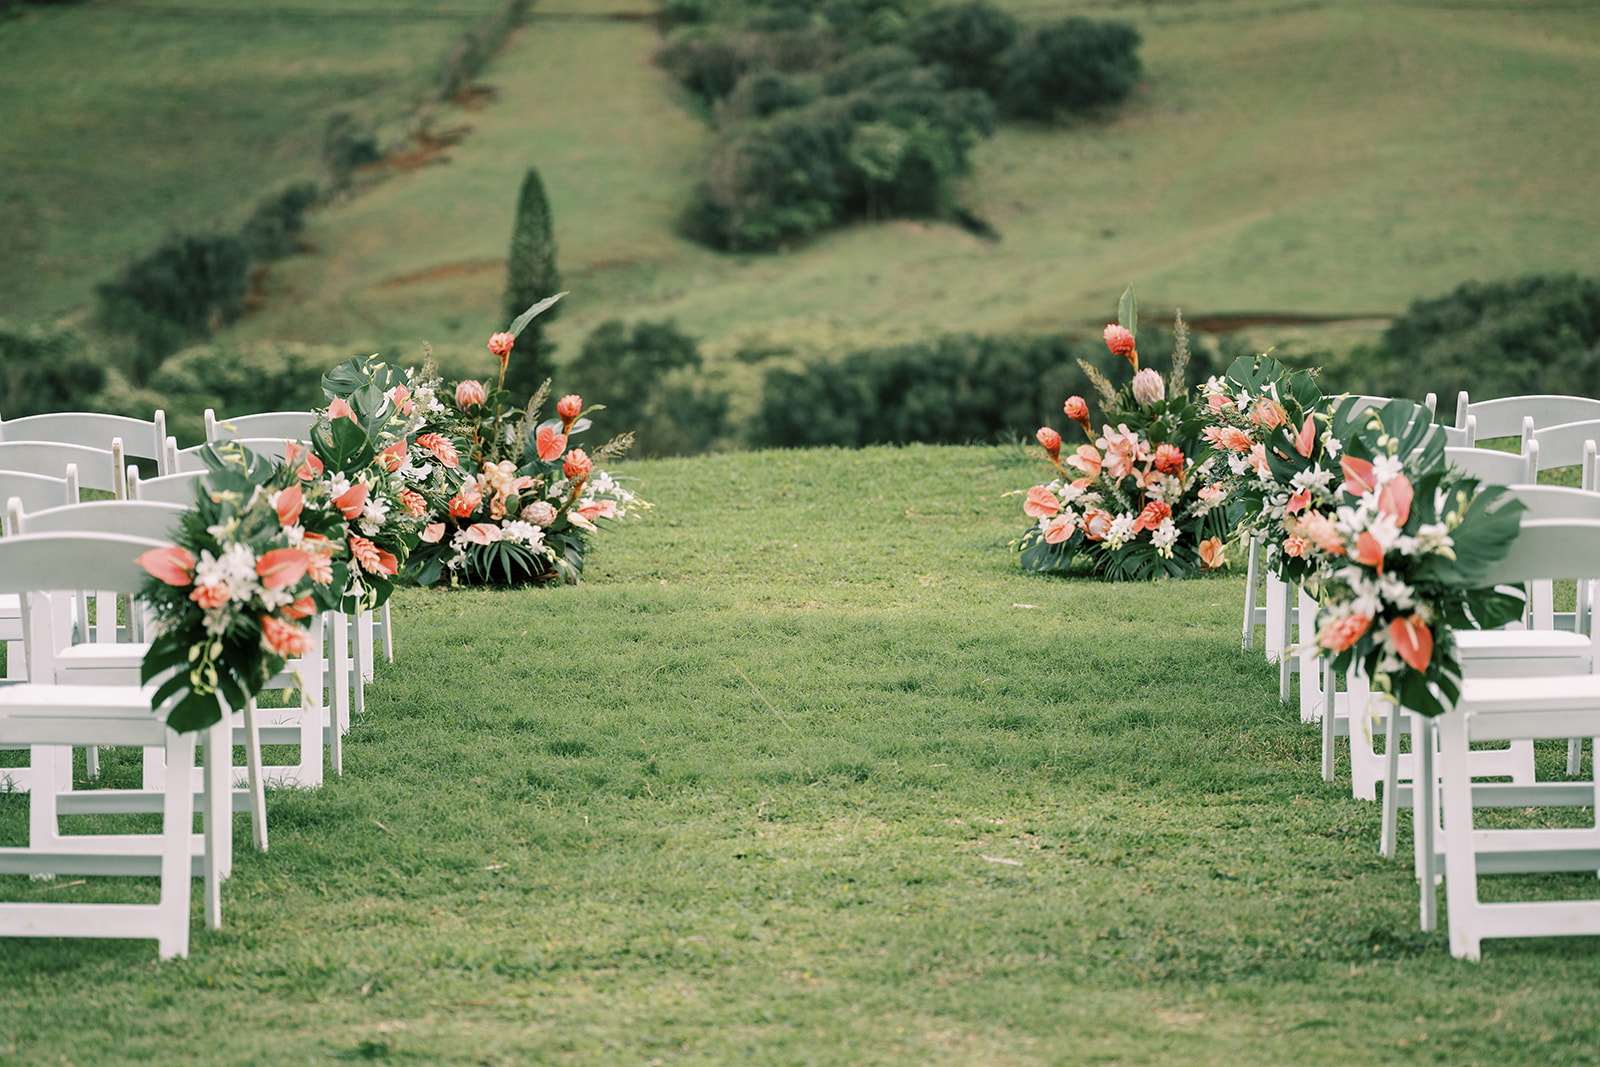 A white wedding ceremony set up in a grassy field at Kualoa Ranch, with mountains in the background.